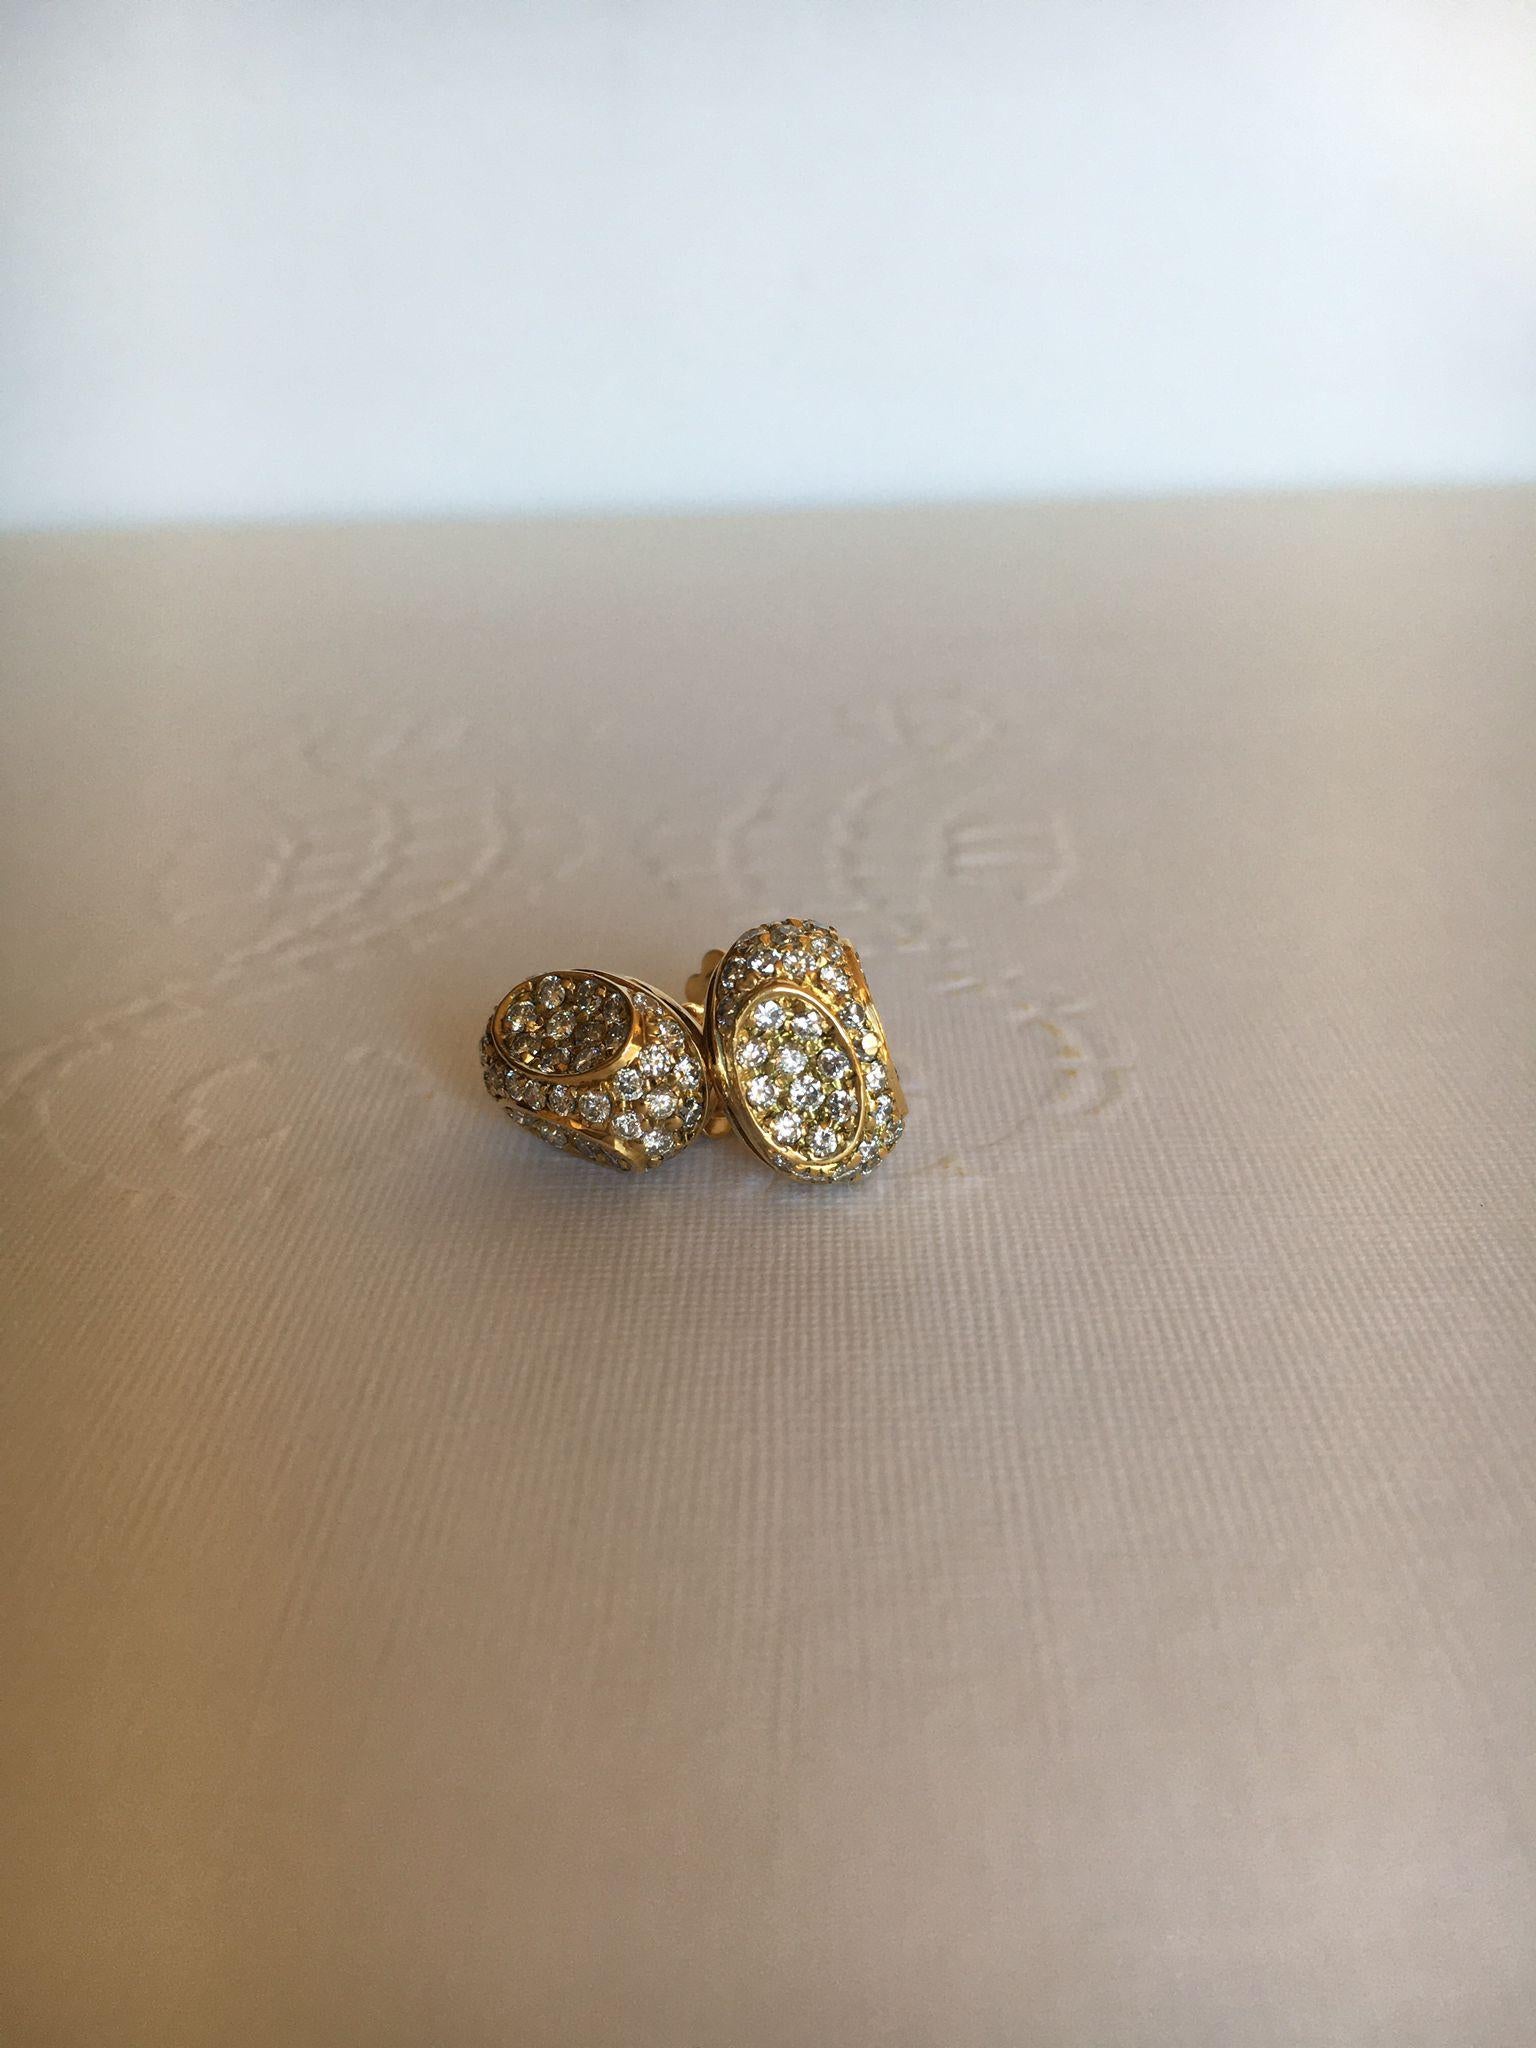 Contemporary 18kt yellow gold 4.98ct earrings, diamonds 1.72ct, handmade stud earrings For Sale